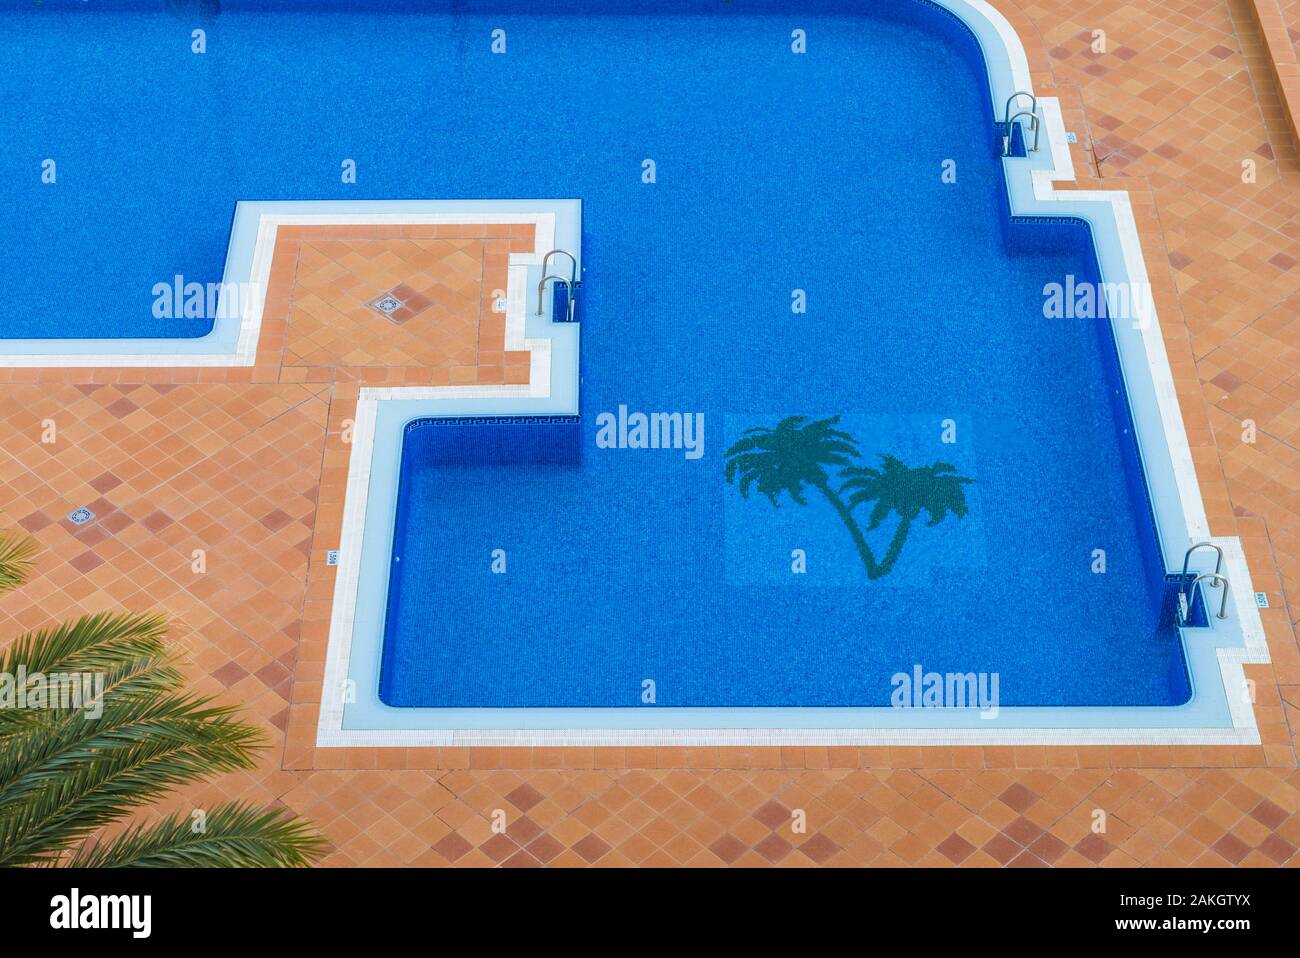 Spain, Canary Islands, Tenerife Island, Playa de Las Americas, elevated view of swimming pool with palms Stock Photo